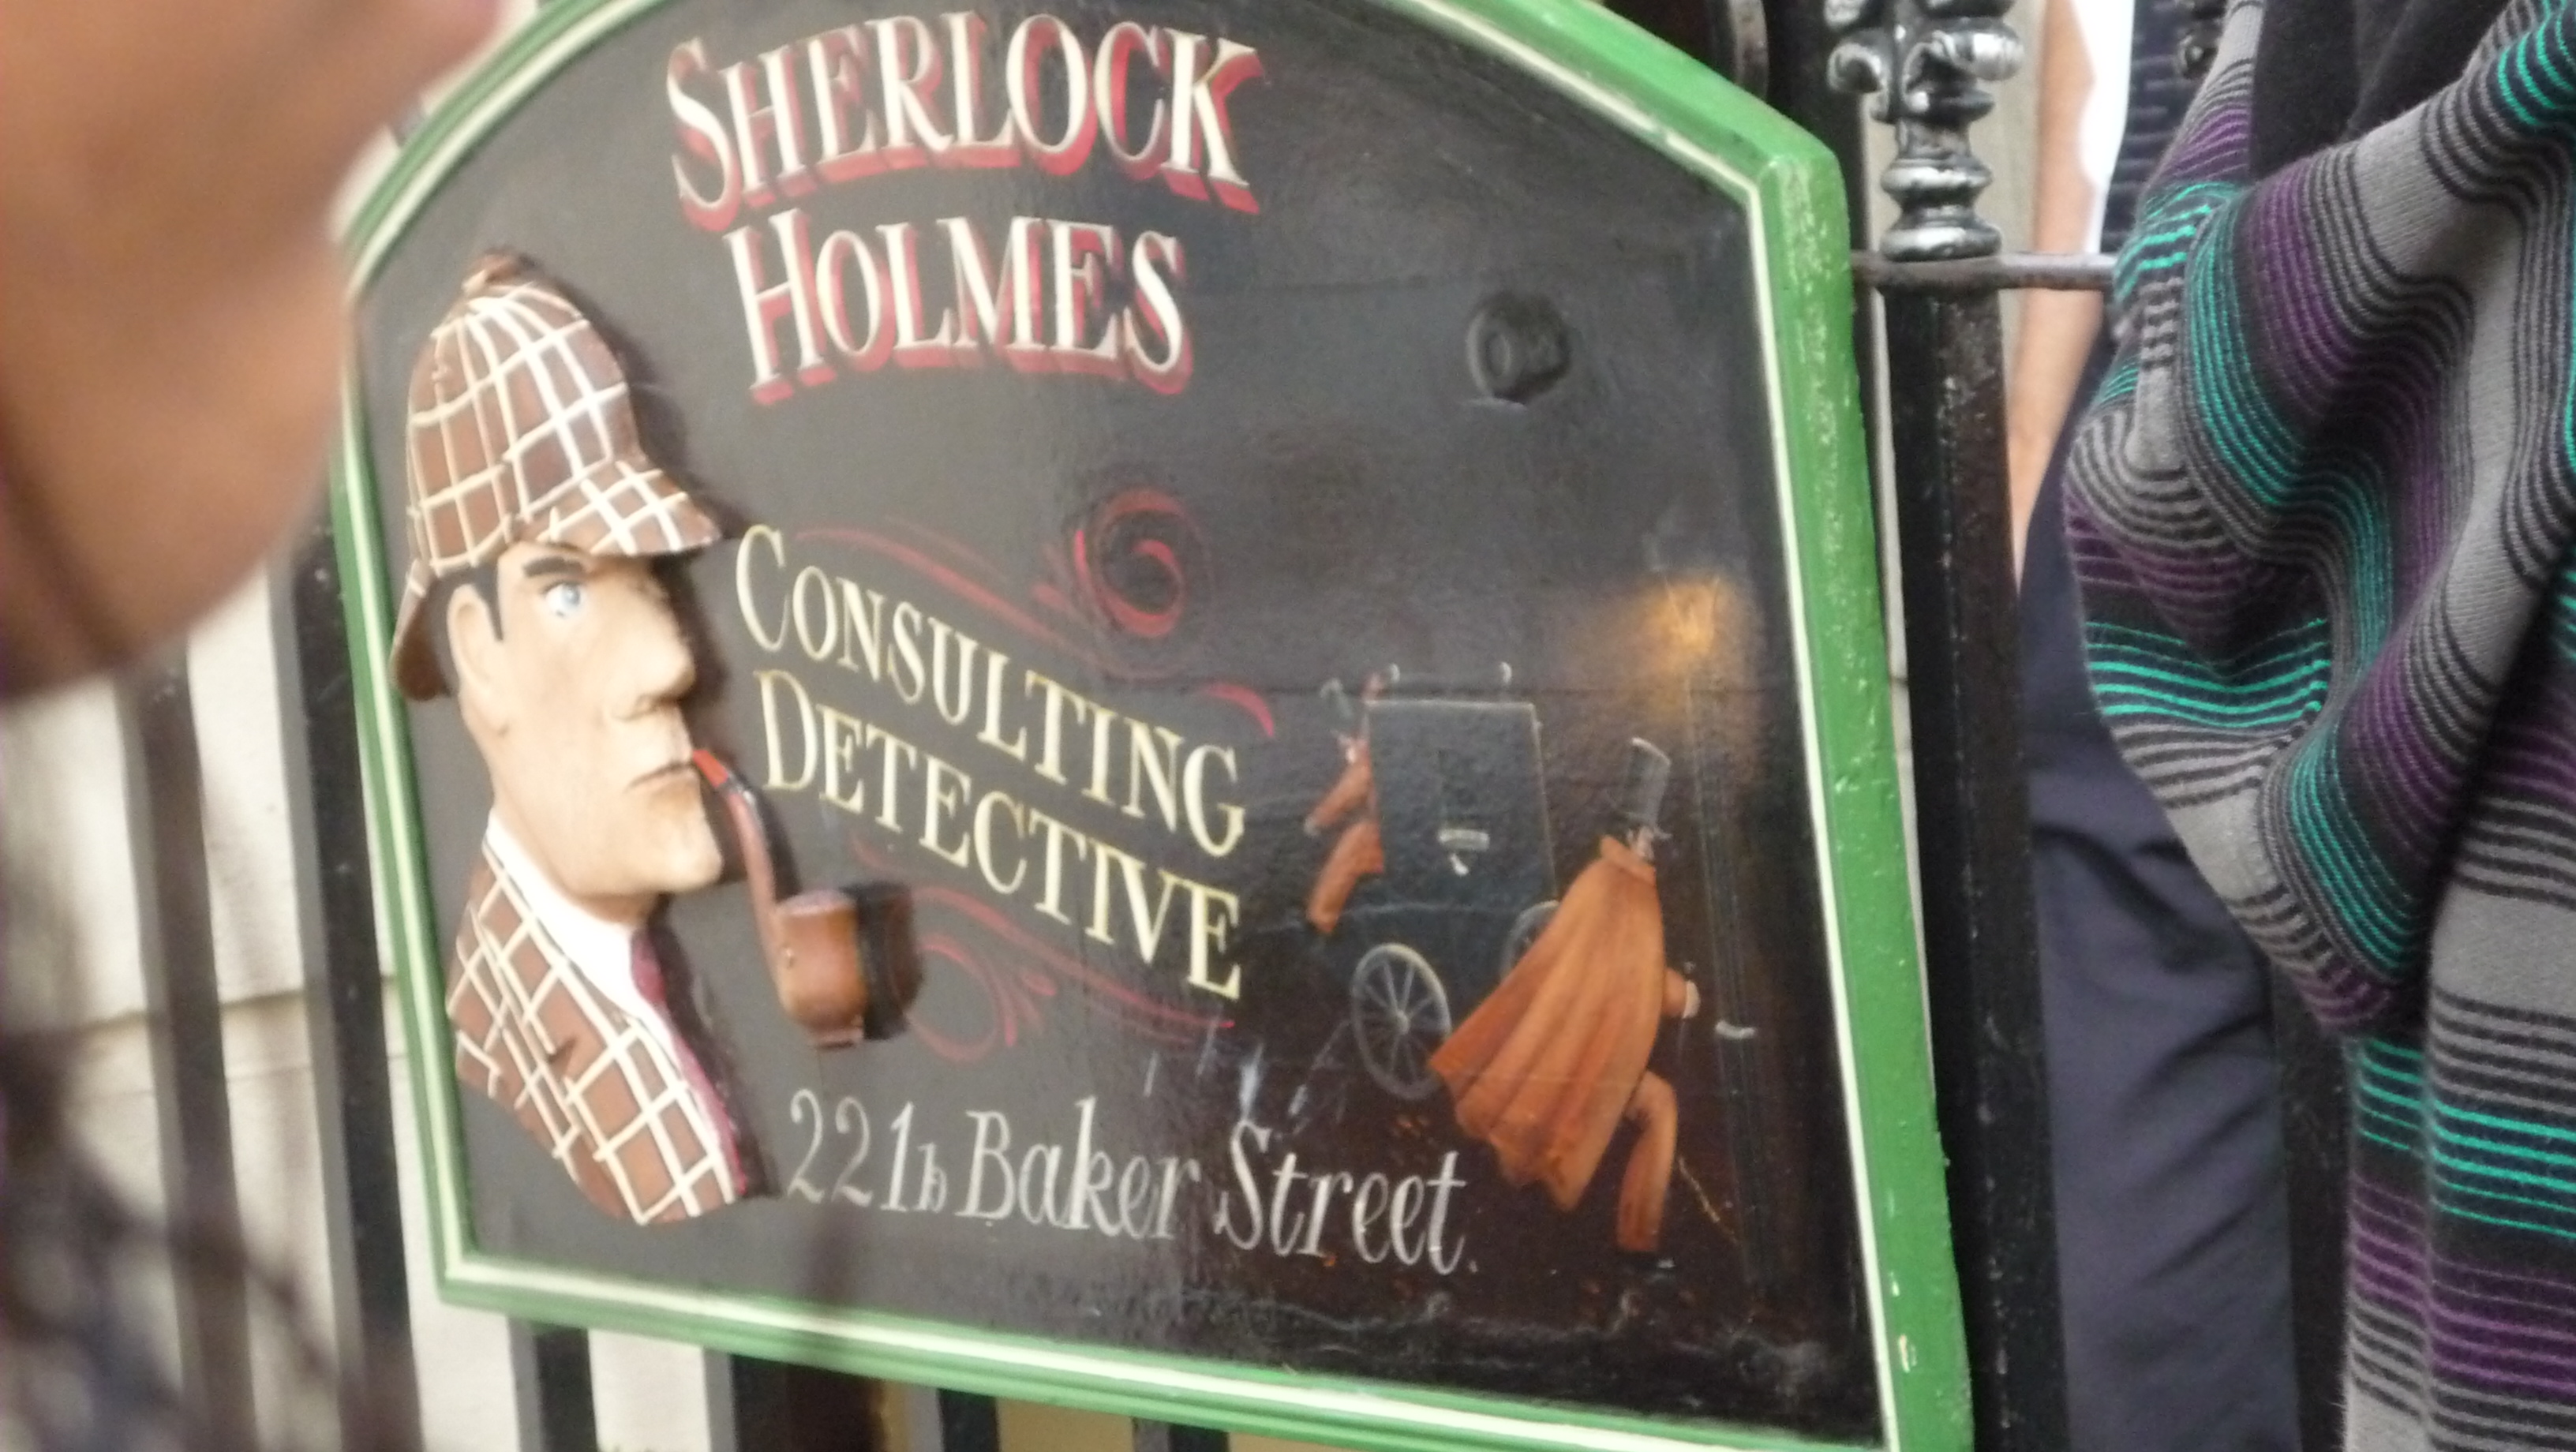 Sherlock Holmes - consulting detective